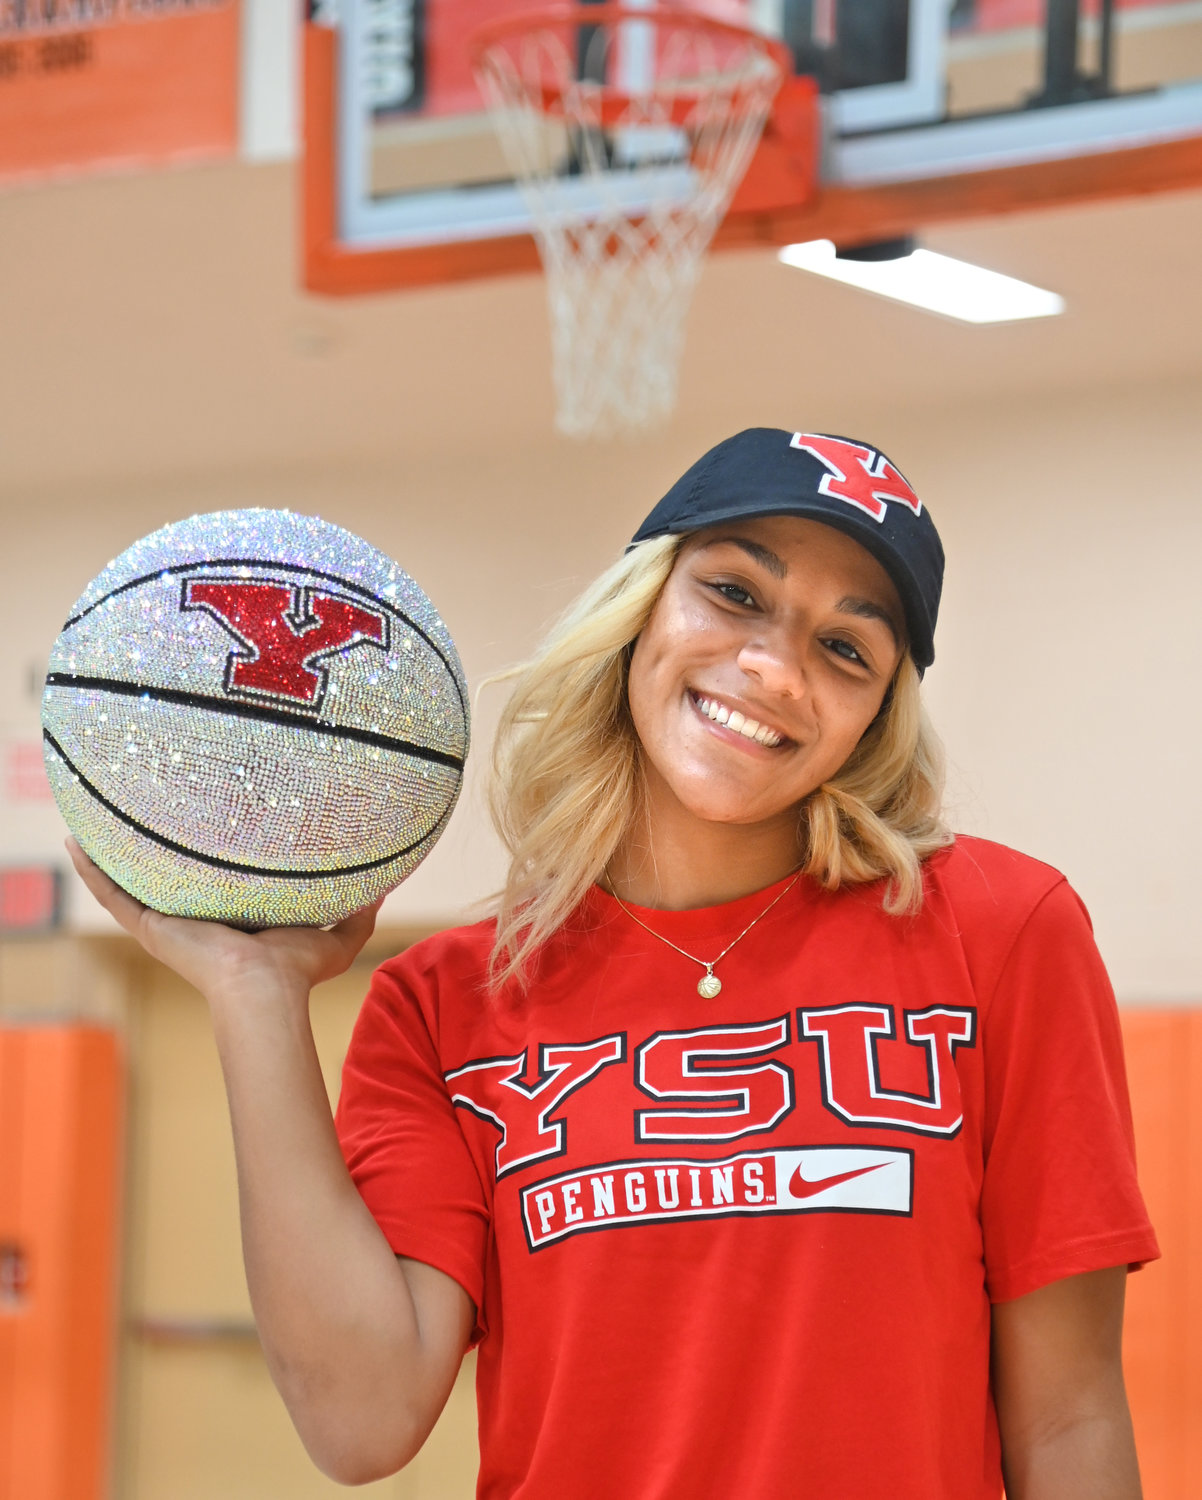 Amya McLeod poses at the Rome Free Academy basketball court after signing her National Letter of Intent Thursday to play Division I college basketball at Youngstown State in Ohio. The senior is closing in on second in all-time scoring for the Black Knights and is among the leaders in virtually every offensive and defensive career statistic in program history.